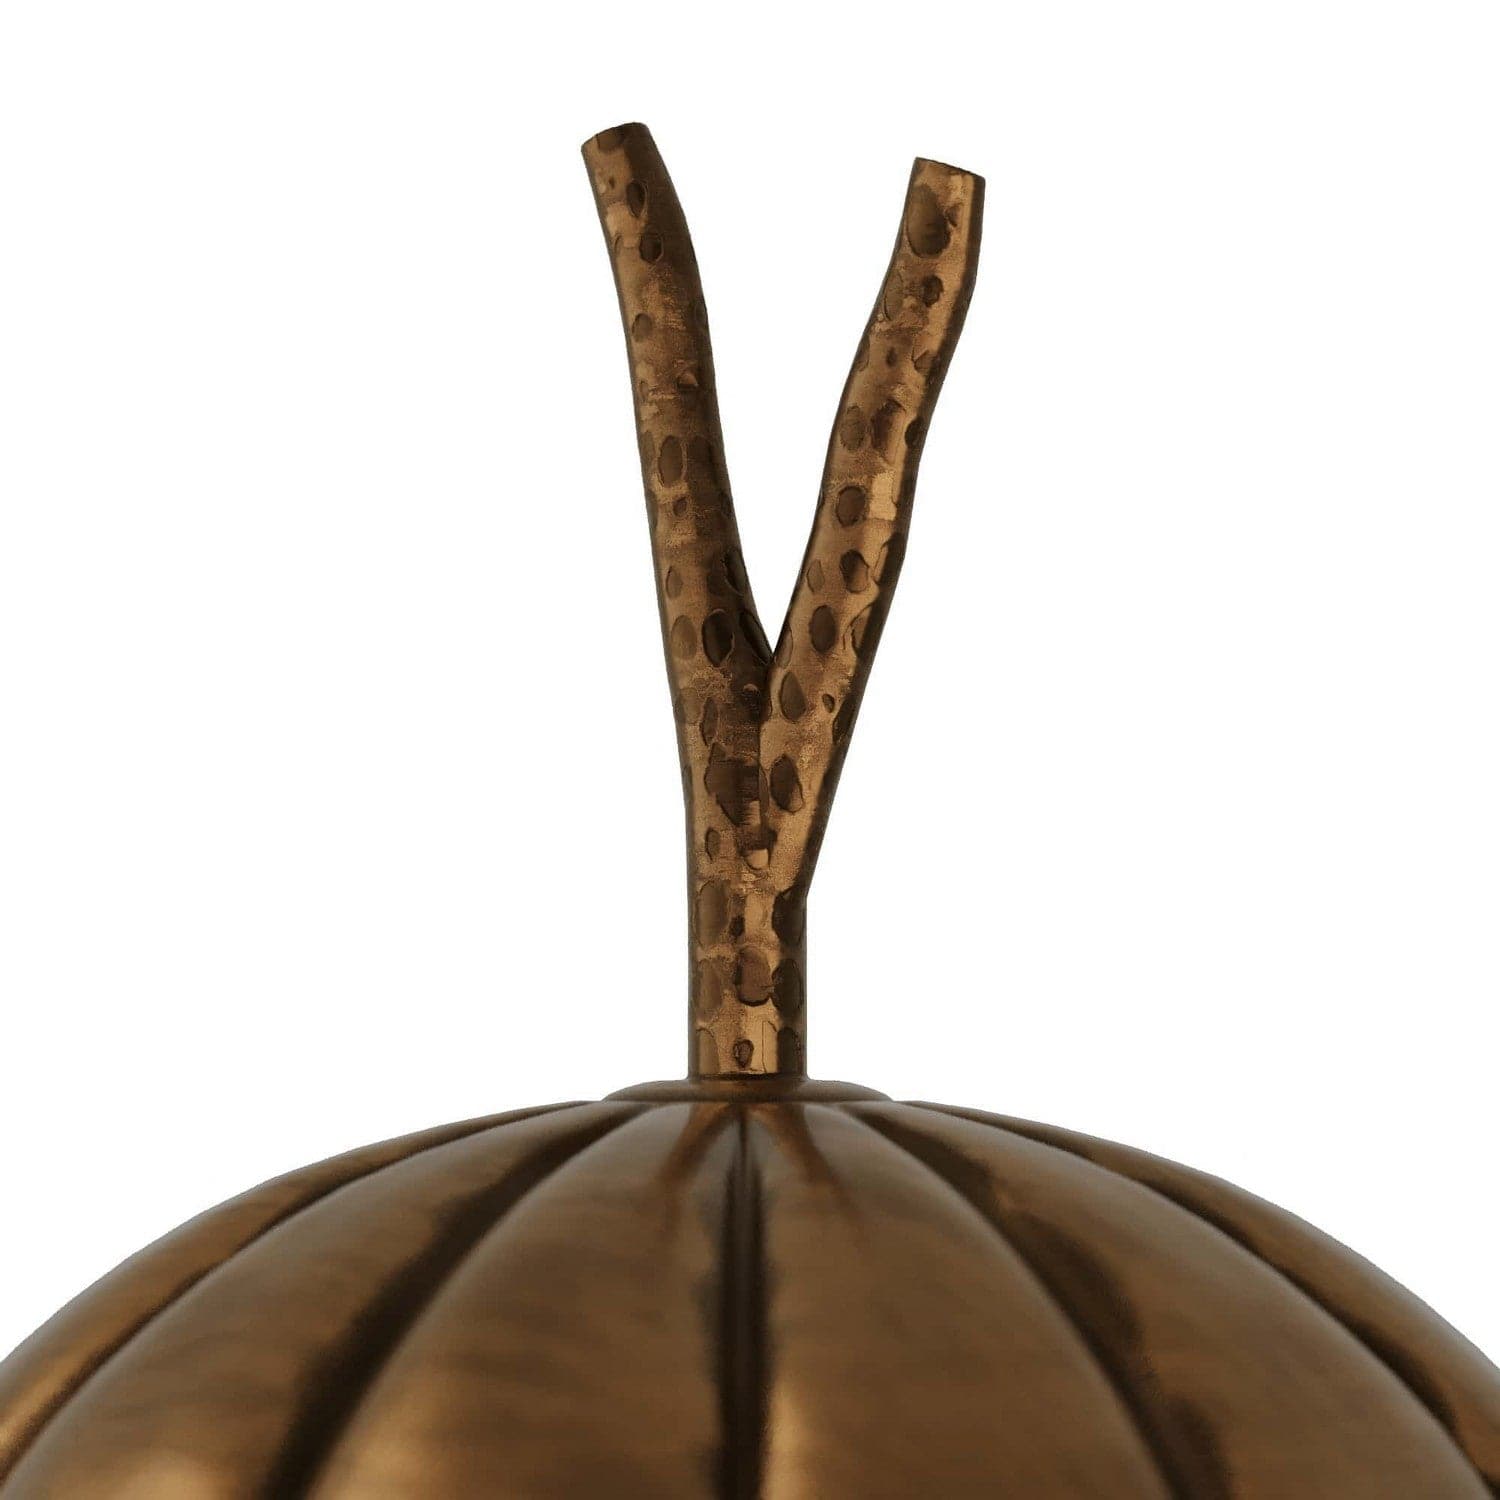 Sculpture from the Soursop collection in Vintage Brass finish